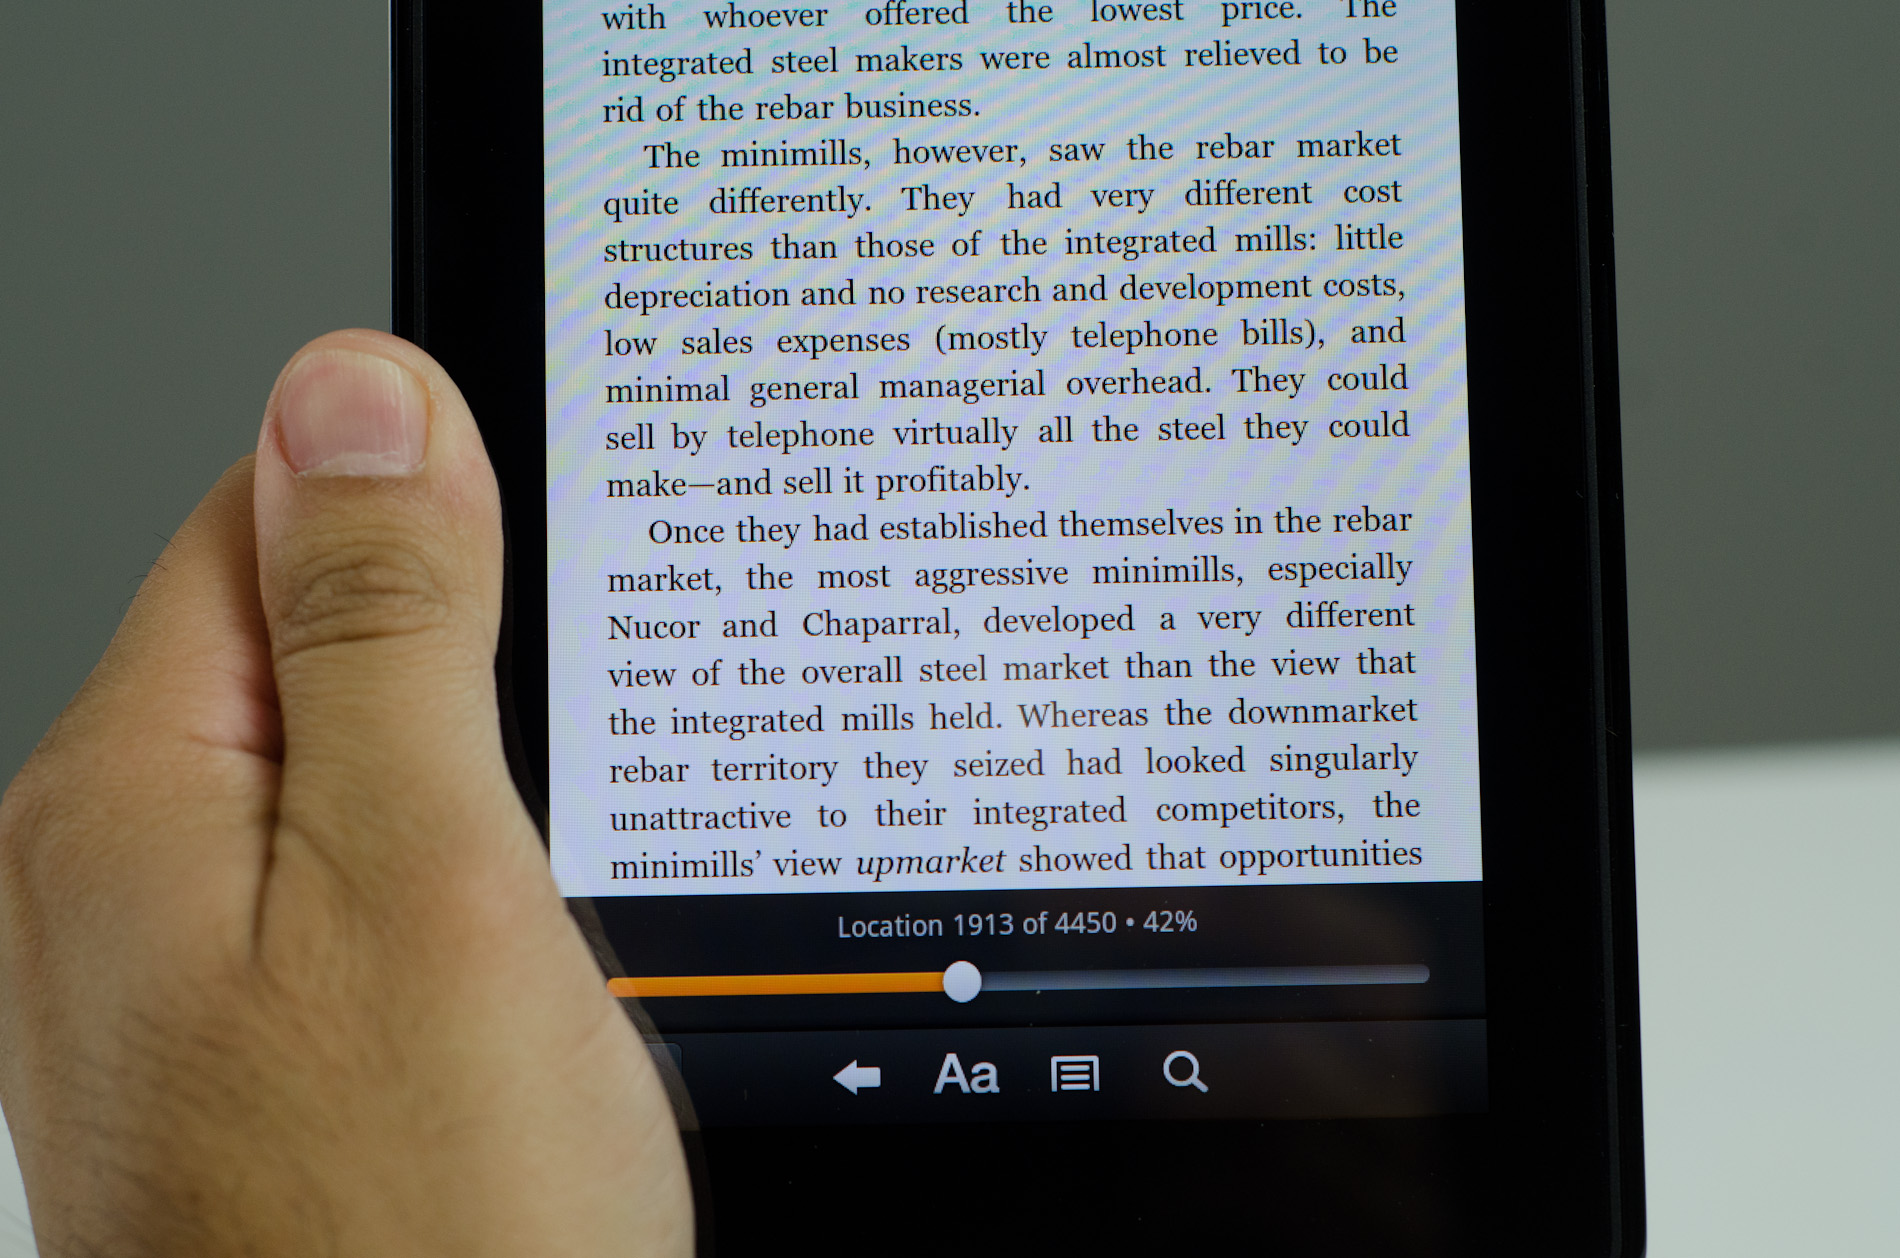 copy text from kindle reader